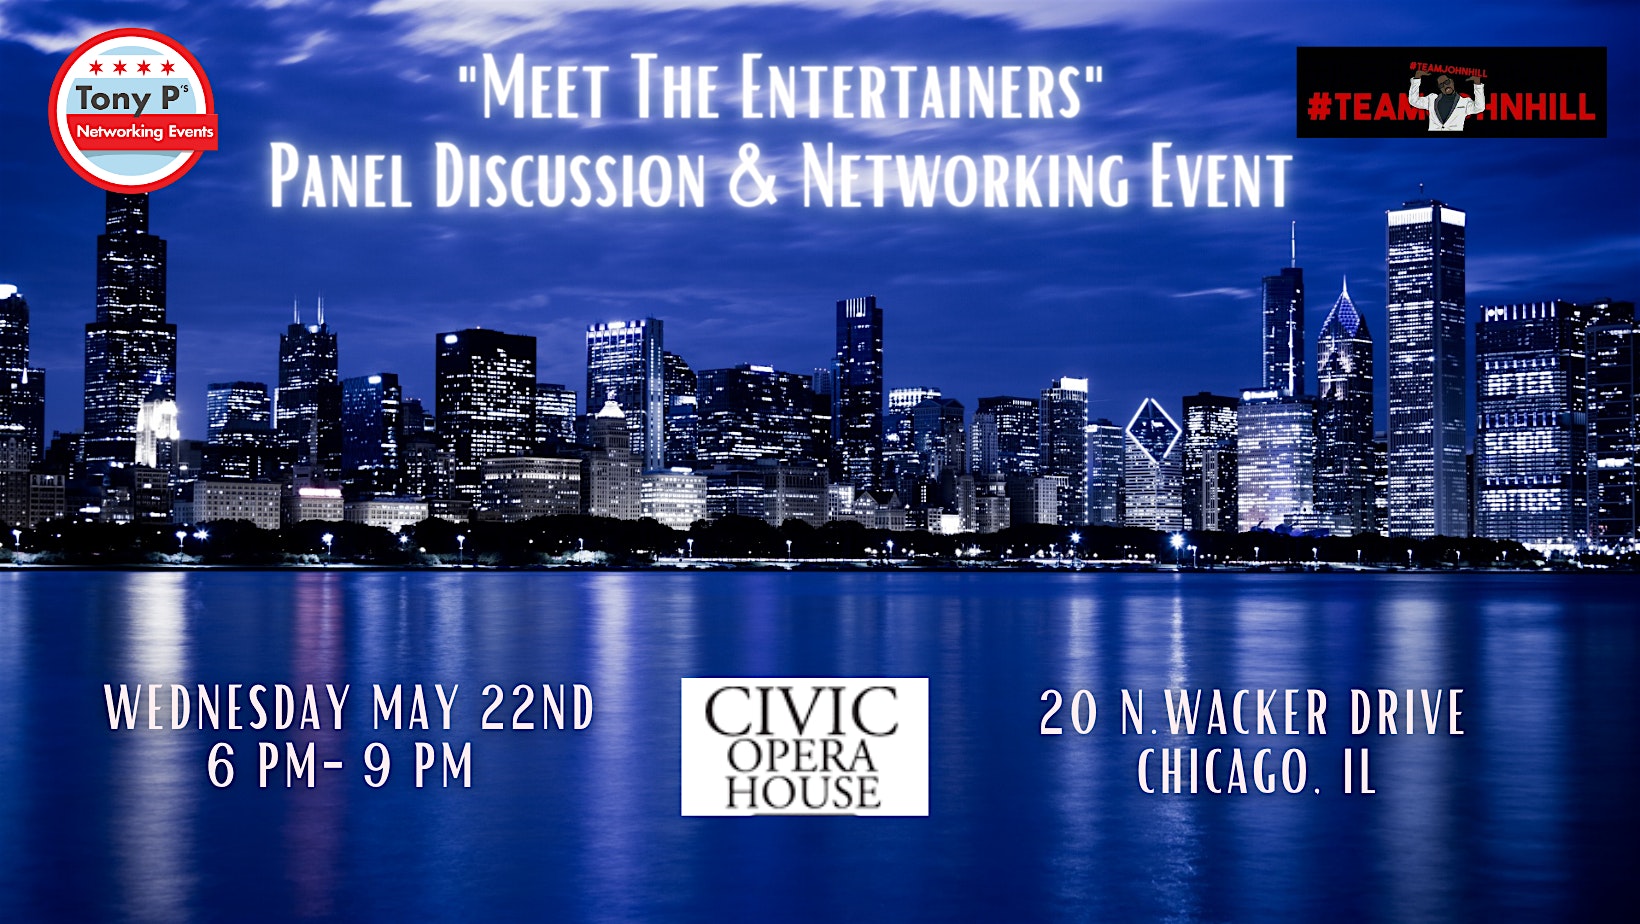 Tony P’s “Meet The Entertainers” Networking Event & Panel Discussion